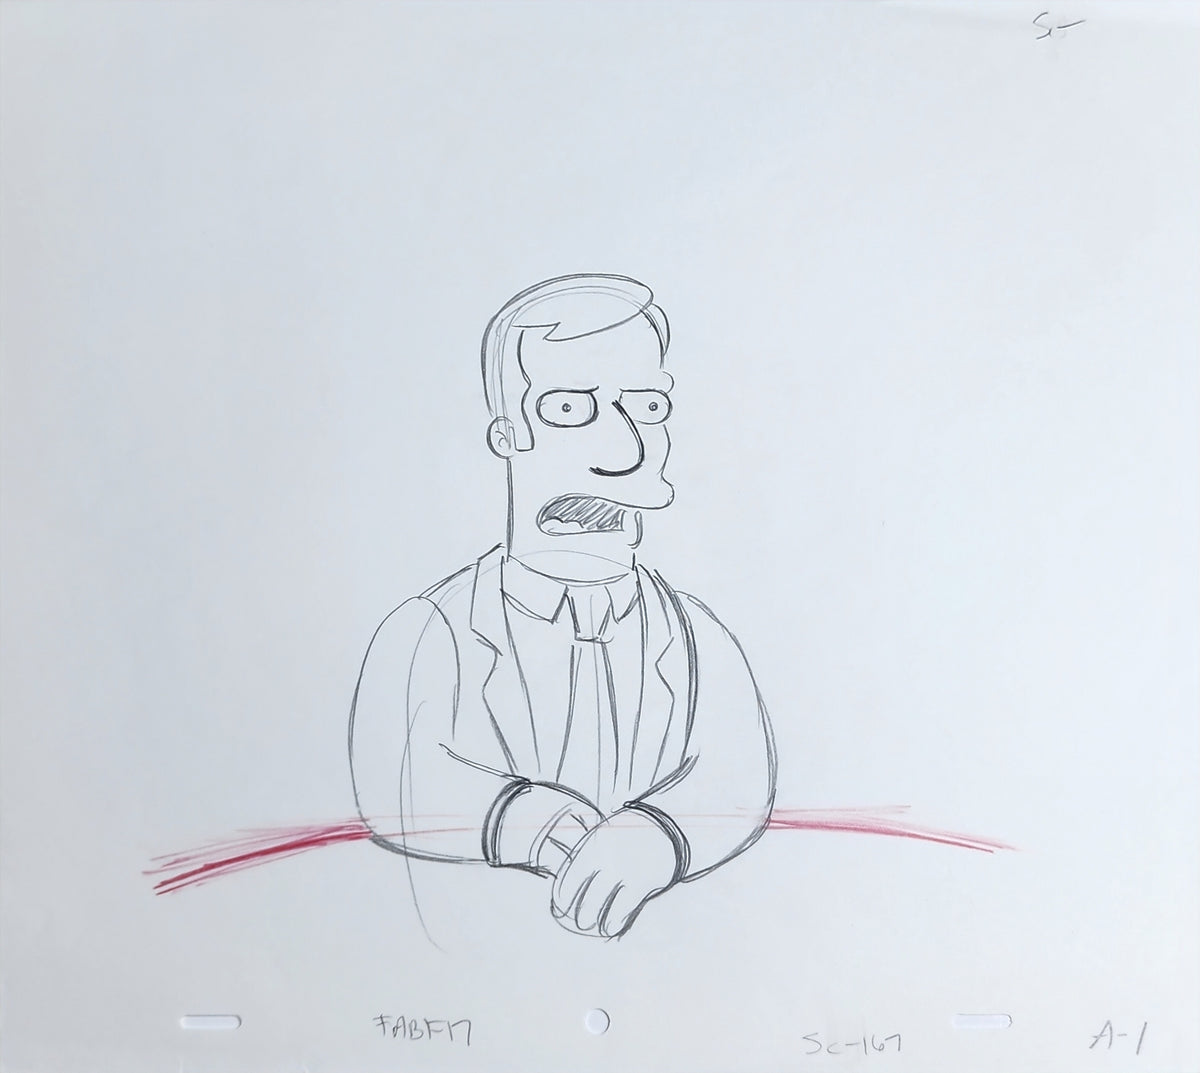 Simpsons Animation Production Cel Drawing - 3790